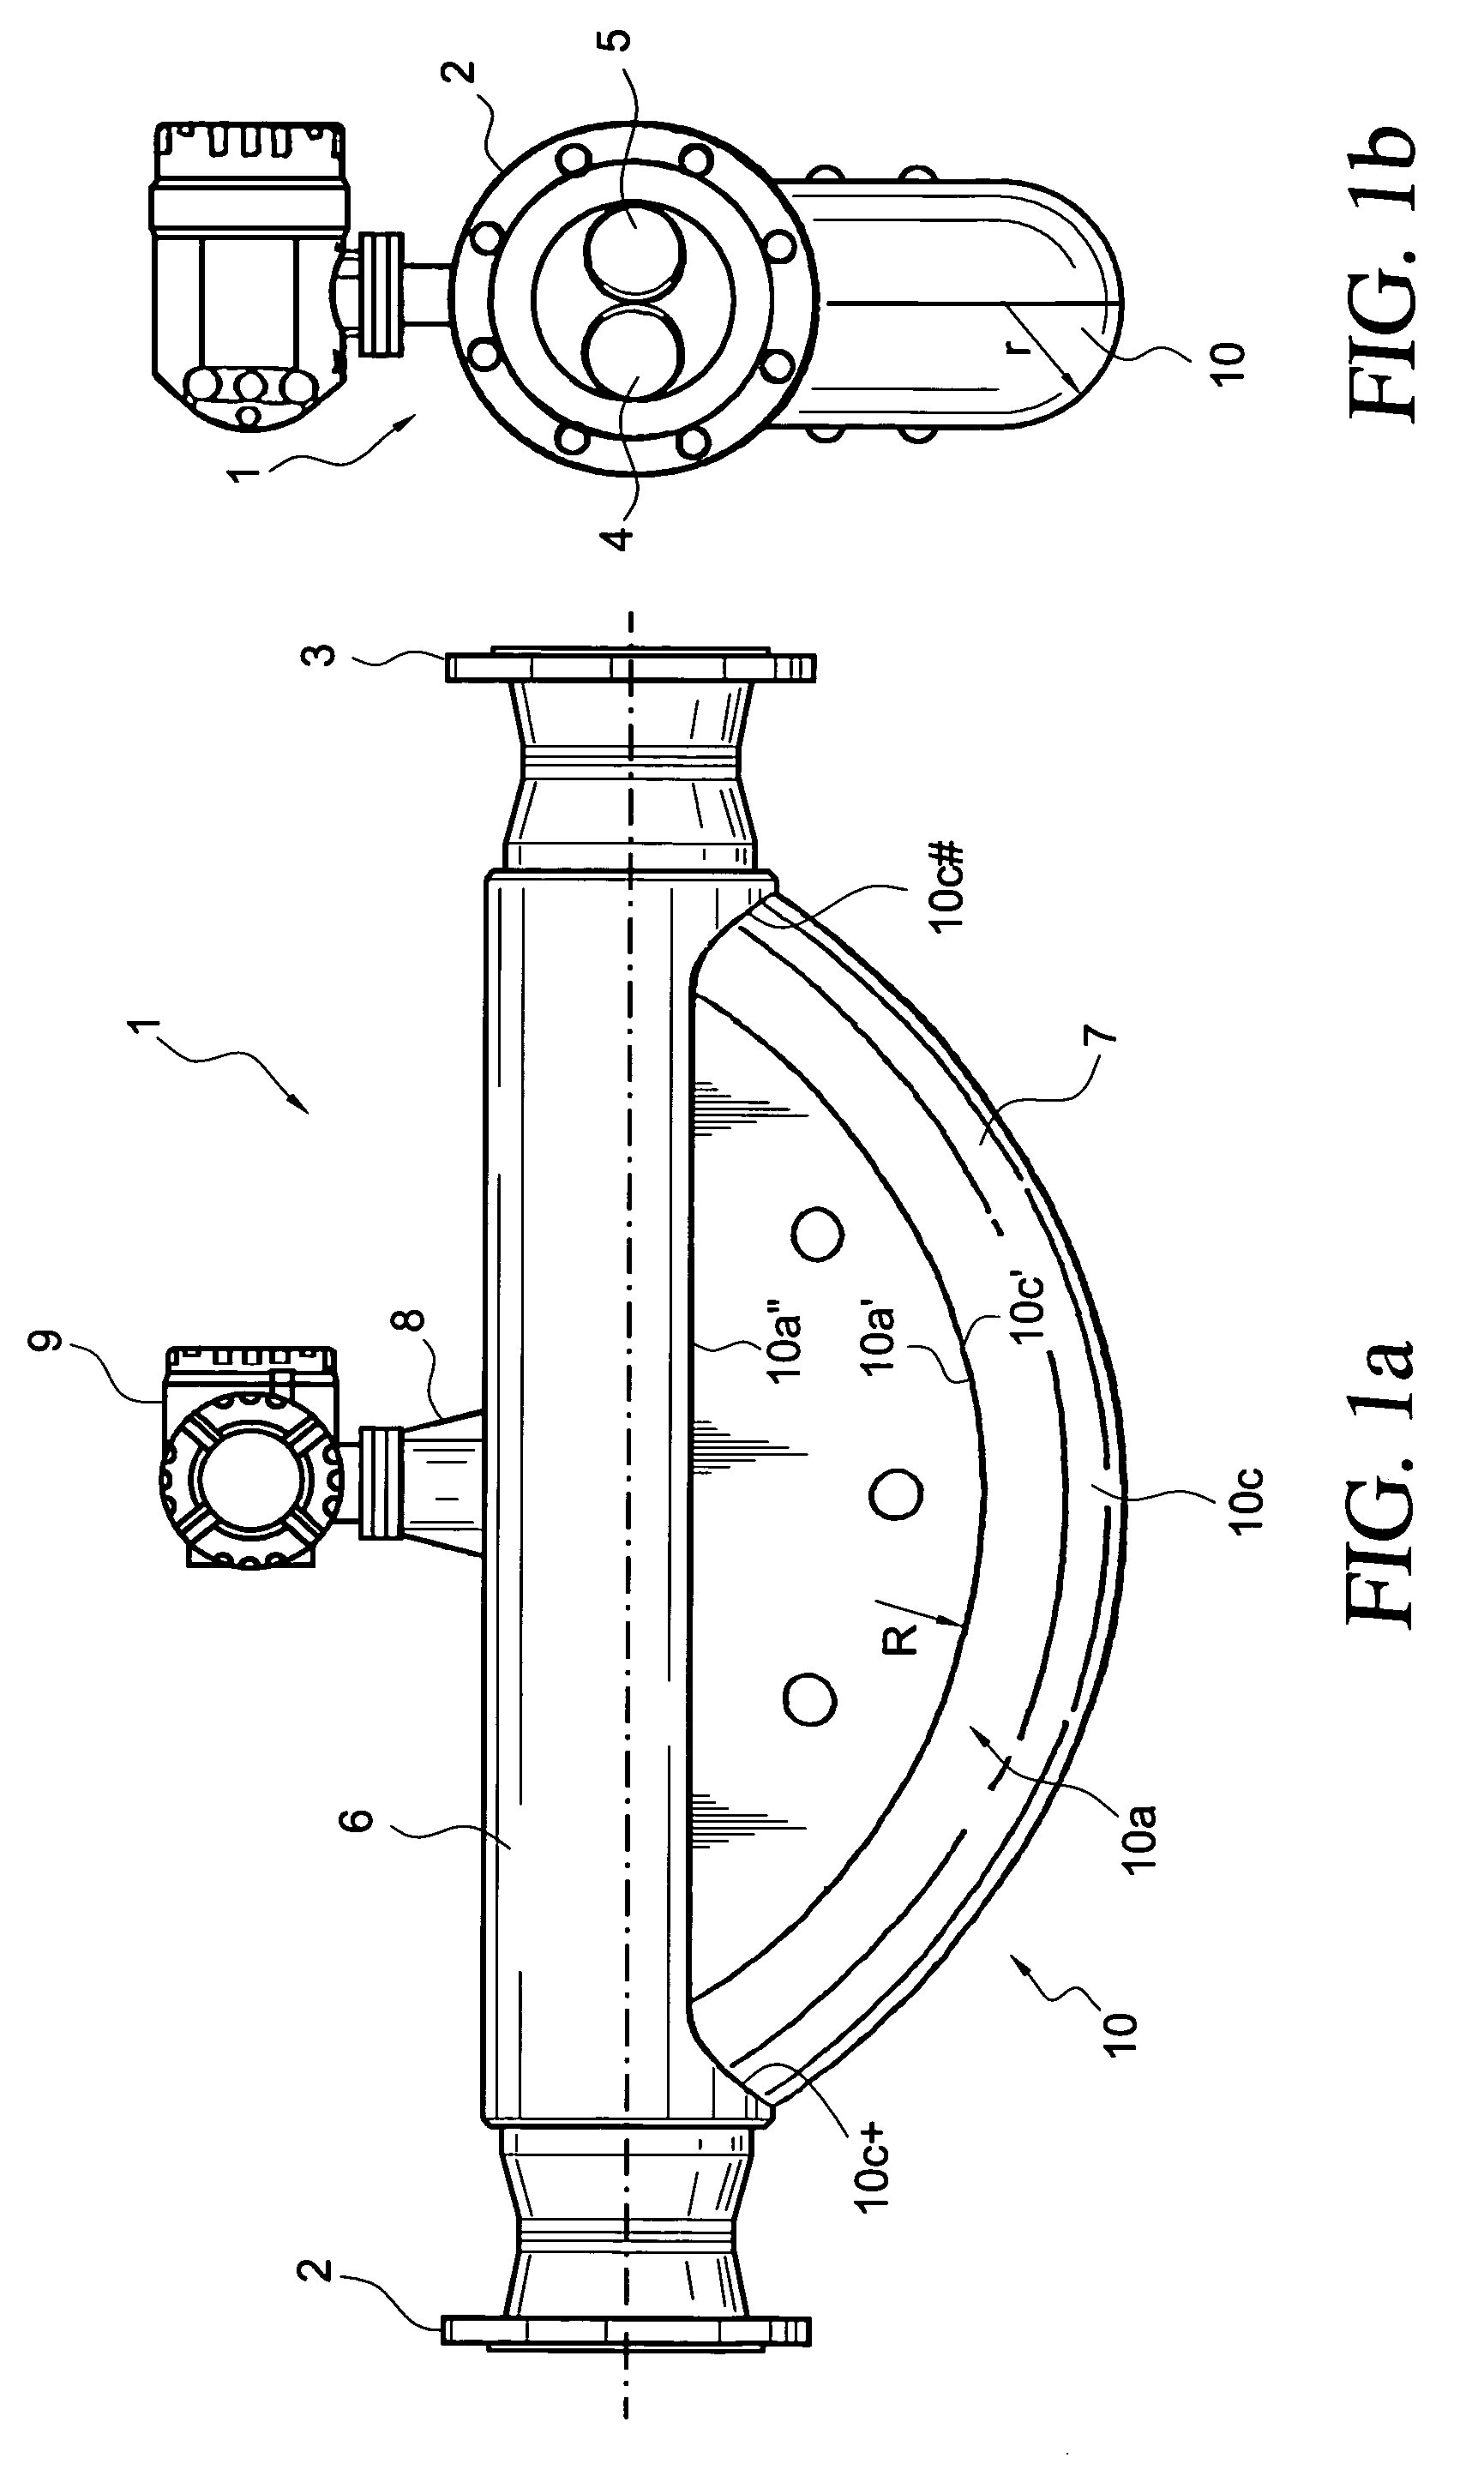 Inline measuring device with a vibration-type measurement pickup